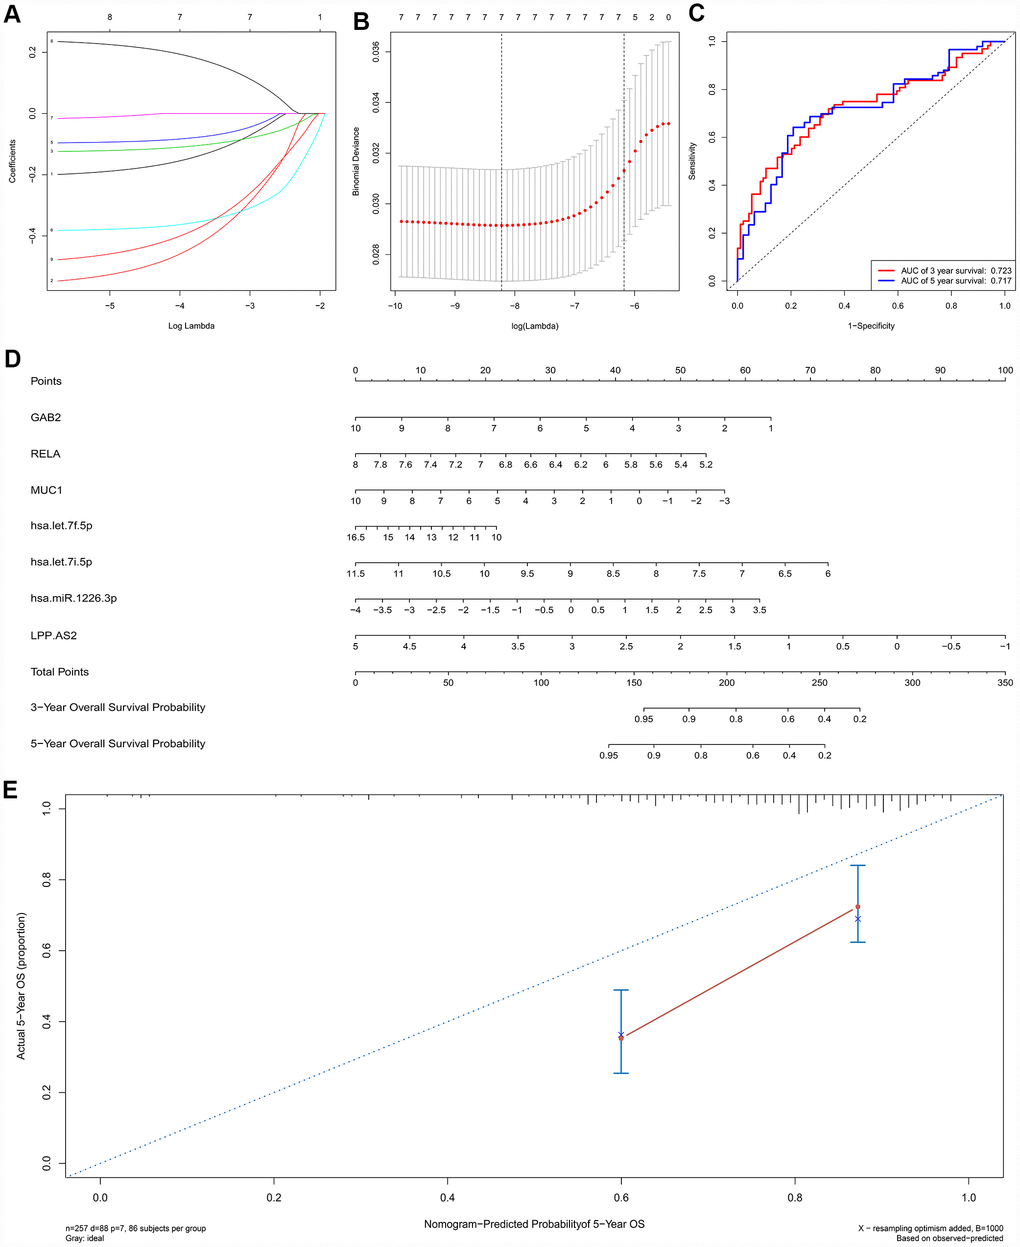 The results of the multivariate Cox regression, nomogram (E) and model diagnosis process (B, C, D, F) based on the key members in the ceRNA network. Seven potential prognosis-related ceRNAs were integrated into a new multivariable model. The results of the Lasso regression suggested that all seven genes were essential for modeling (A, B). The nomogram was constructed based on the model (D). The ROC and the calibration curves indicated acceptable accuracy (Area Under Curve (AUC) of 3-year survival: 0.731; AUC of 5-year survival: 0.724) and discrimination of the nomogram (C, E).